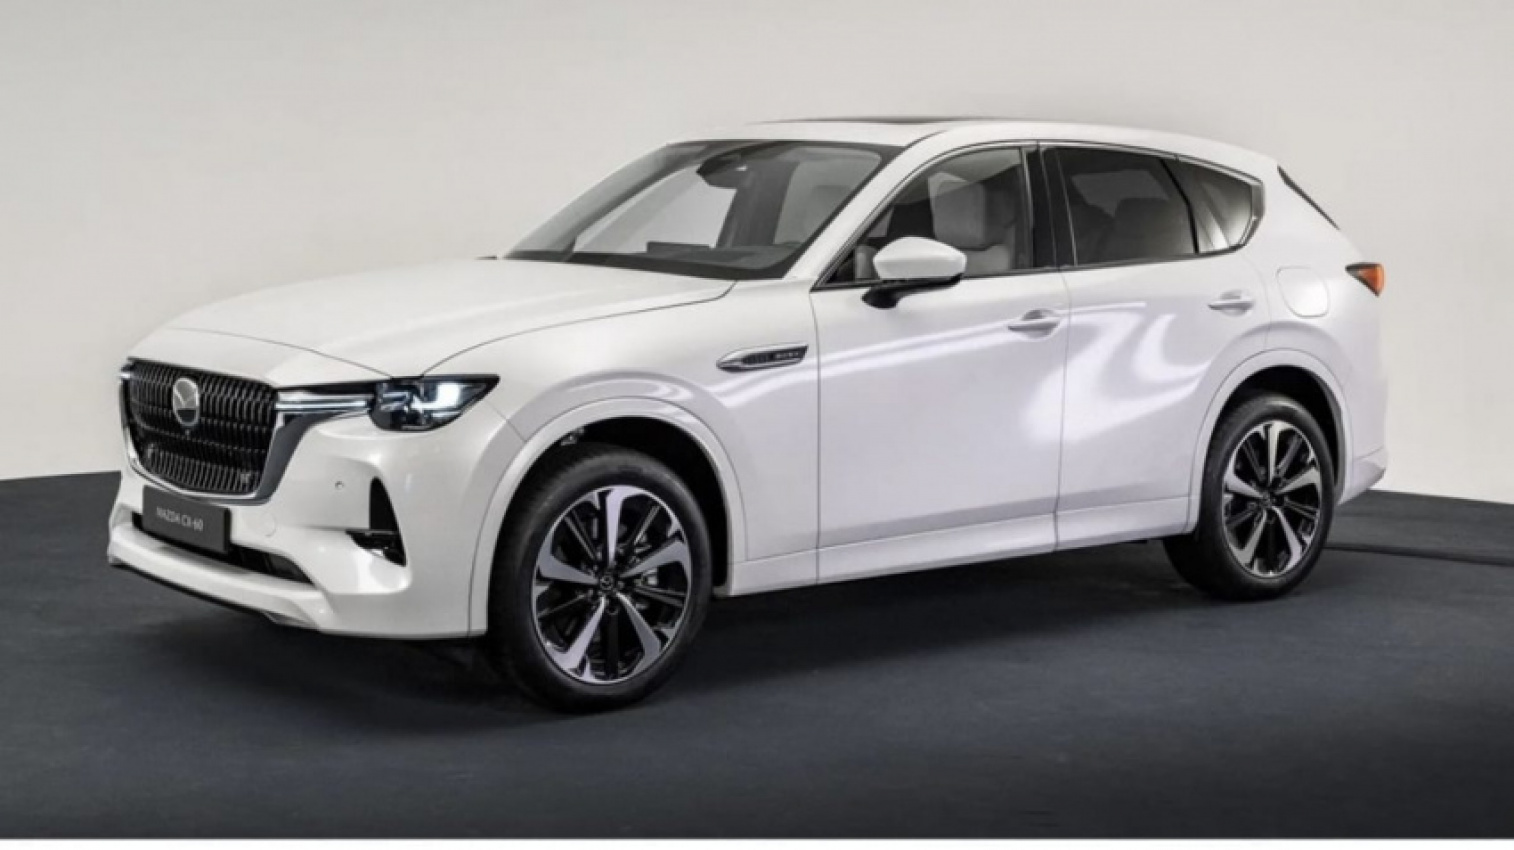 autos, cars, mazda, 2022 mazda cx-60 suv leaked ahead of official reveal